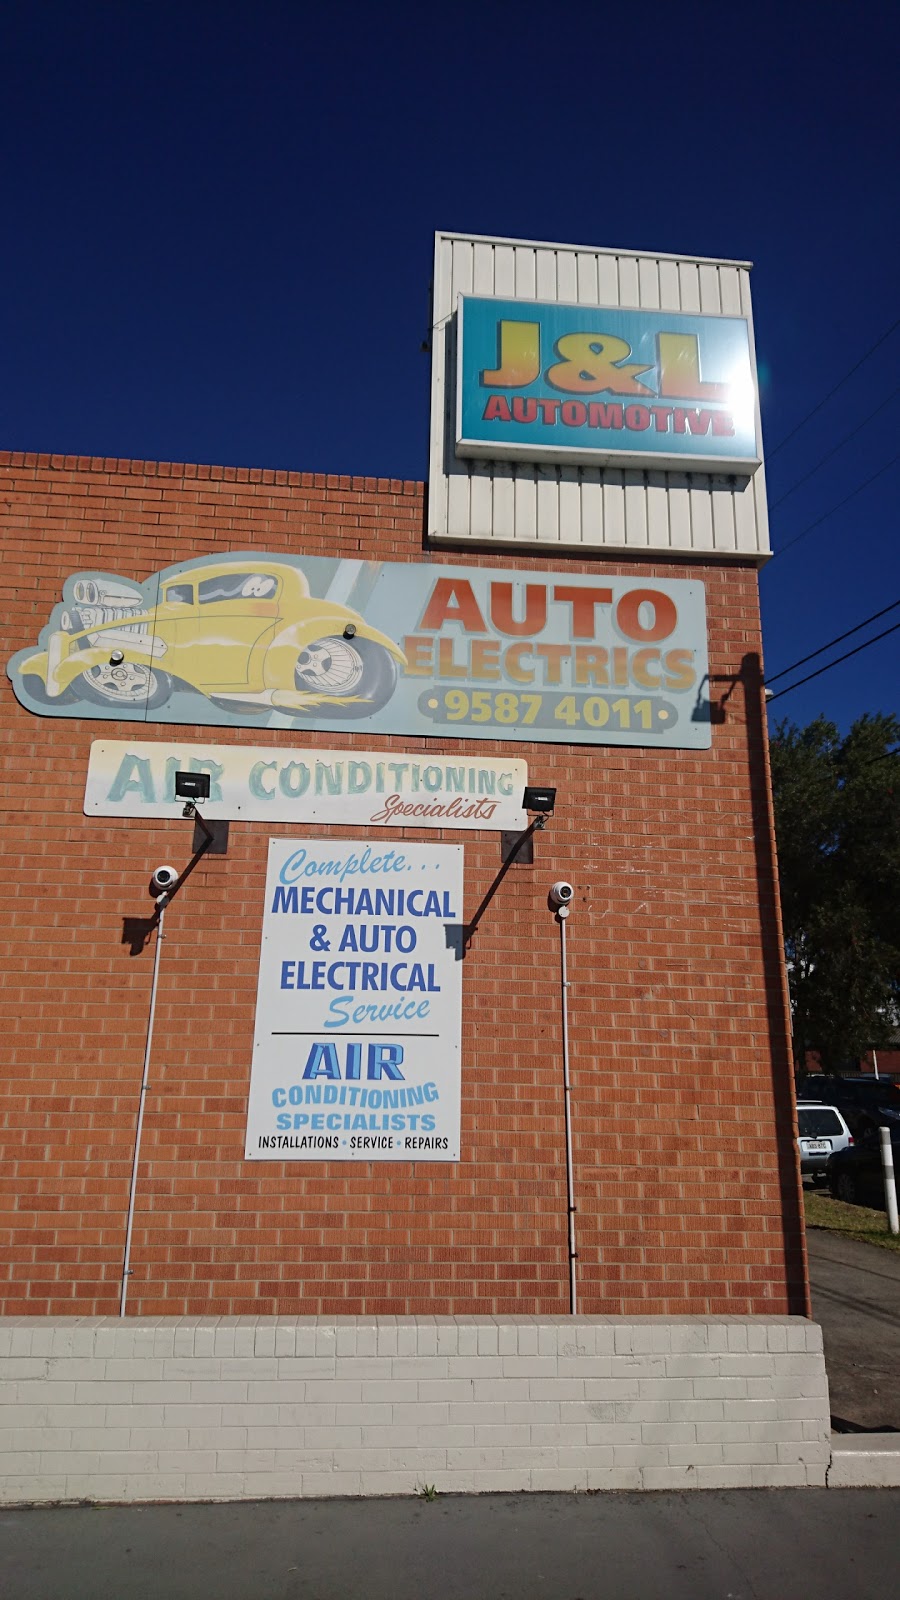 J & L Auto Electrical & Mechanics - Aircon, EFI injection, Pink  | car repair | 614 Forest Rd, Bexley NSW 2207, Australia | 0295874011 OR +61 2 9587 4011